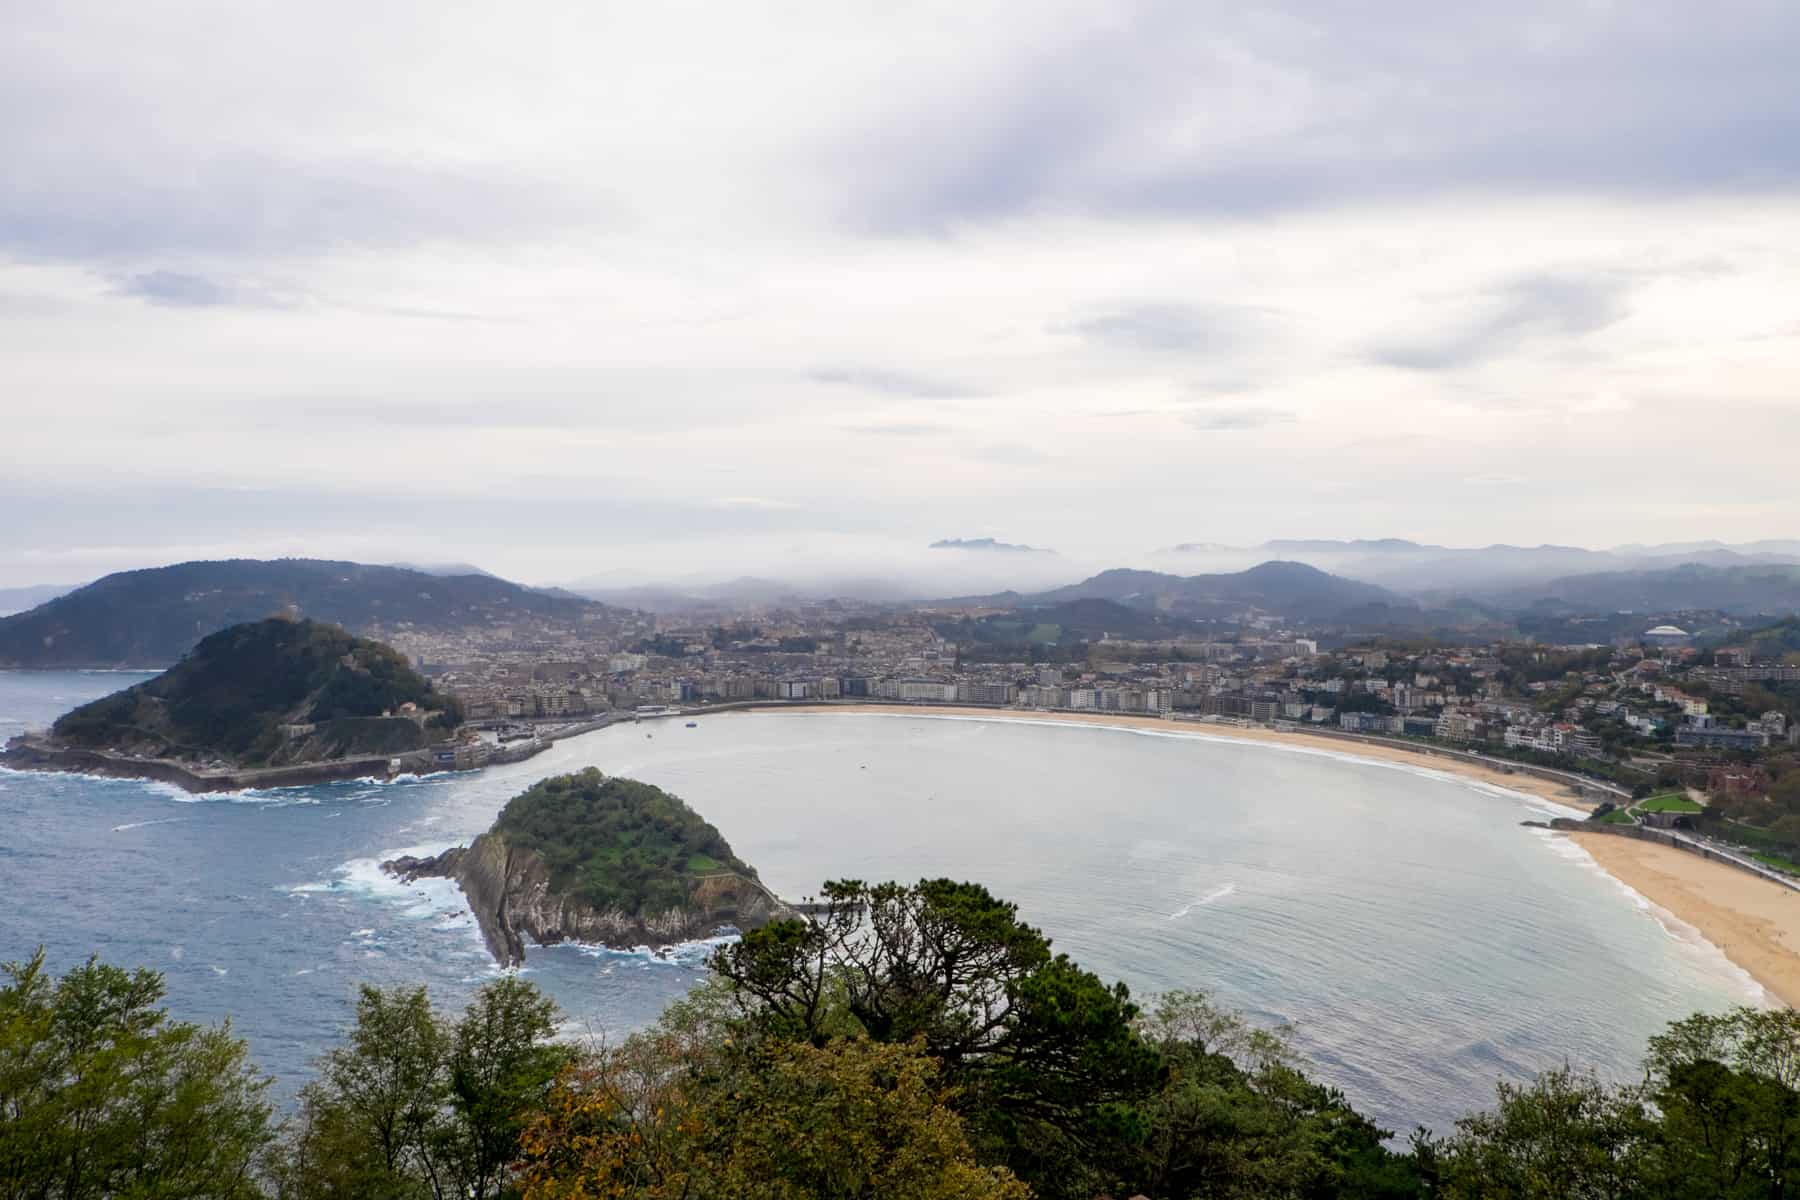 The semi circular coastline of San Sebastian in Northern Spain. To the left are two island mounds, covered in green, and to the right, yellow sand beaches. The city buildings are in the middle. 